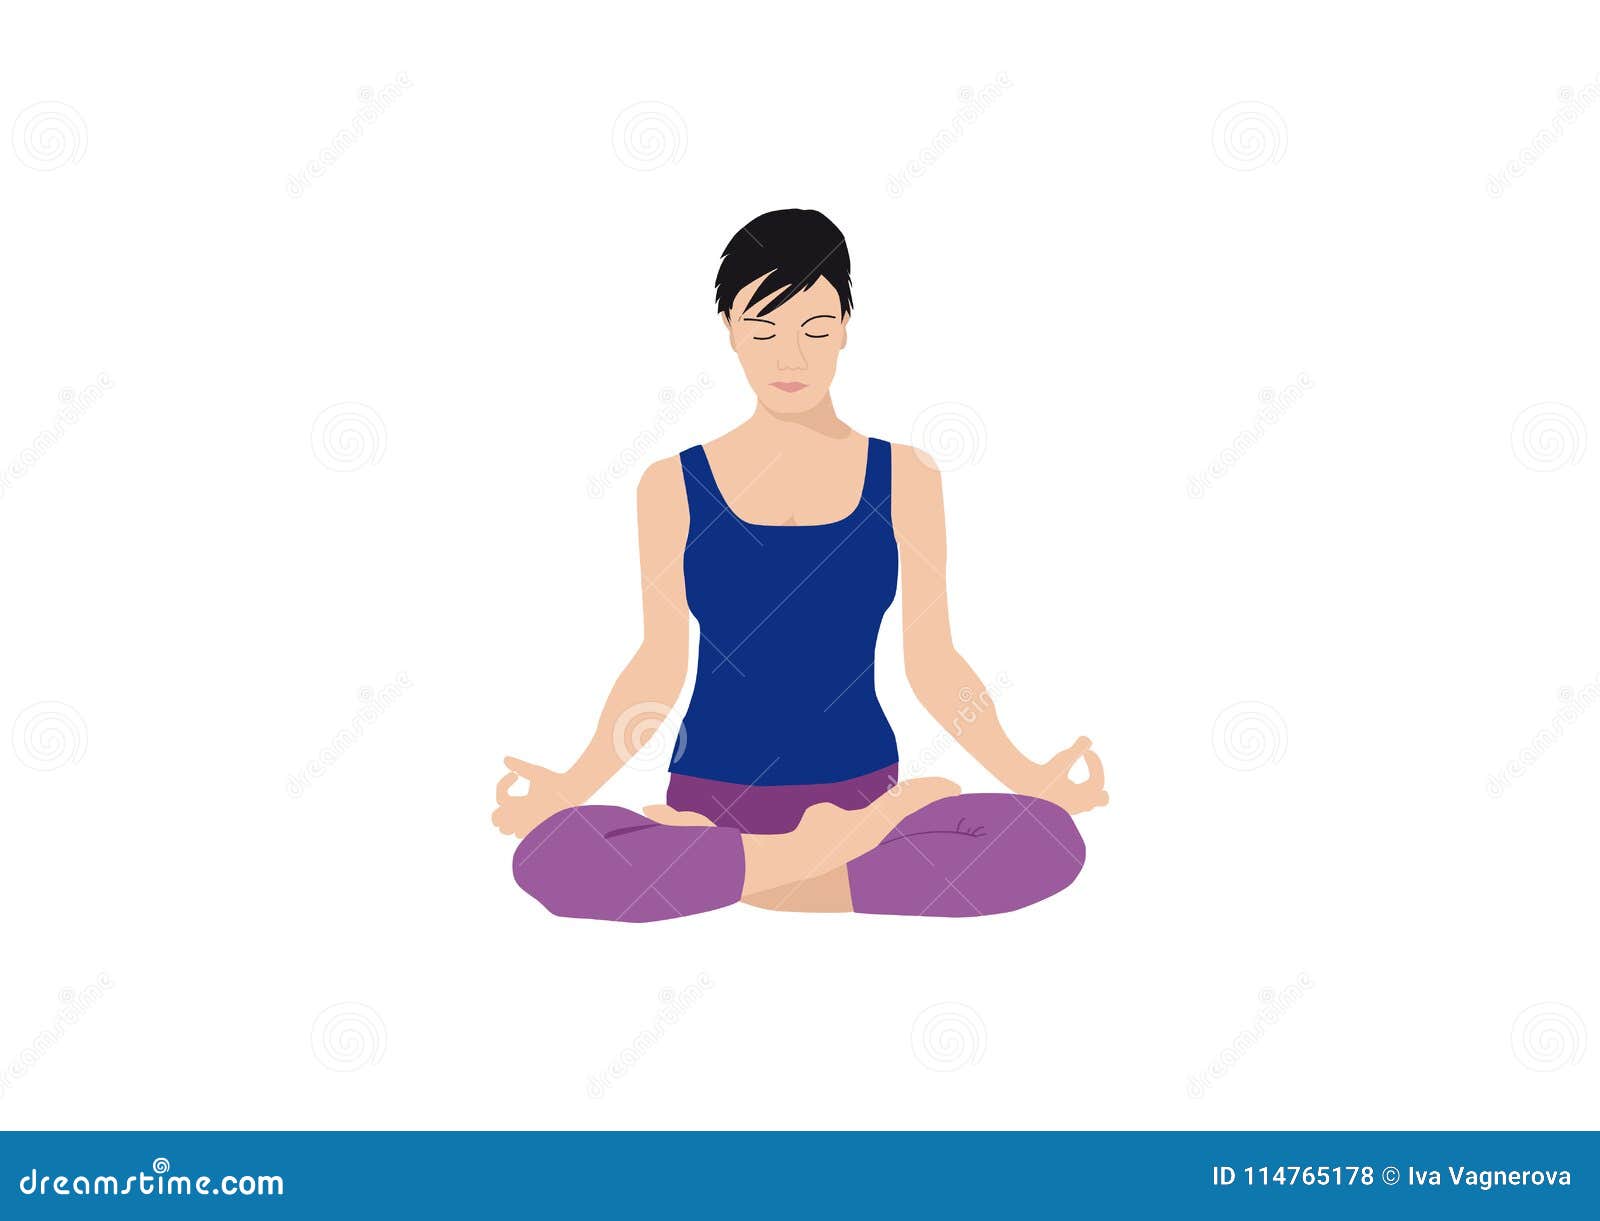 Meditating woman in lotus pose with ornamental background. Yoga  illustration.